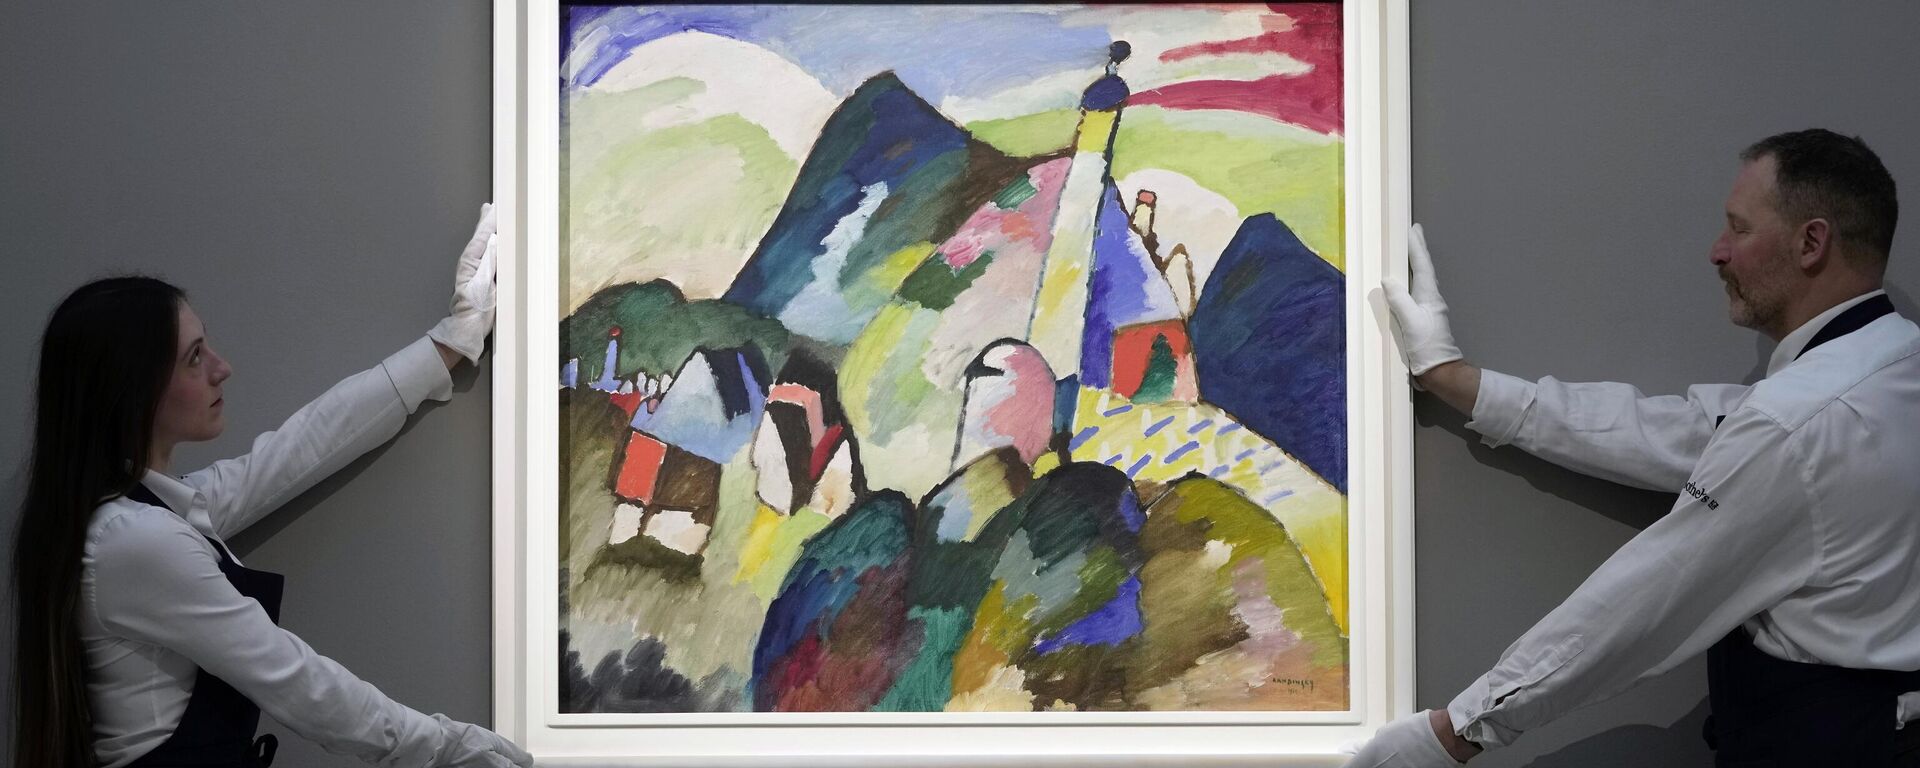 The painting  Murnau with Church II by Russian artist Wassily Kandinsky on display during a media preview of Sotheby's auction, in London, on Feb. 22, 2023.  - Sputnik International, 1920, 02.03.2023